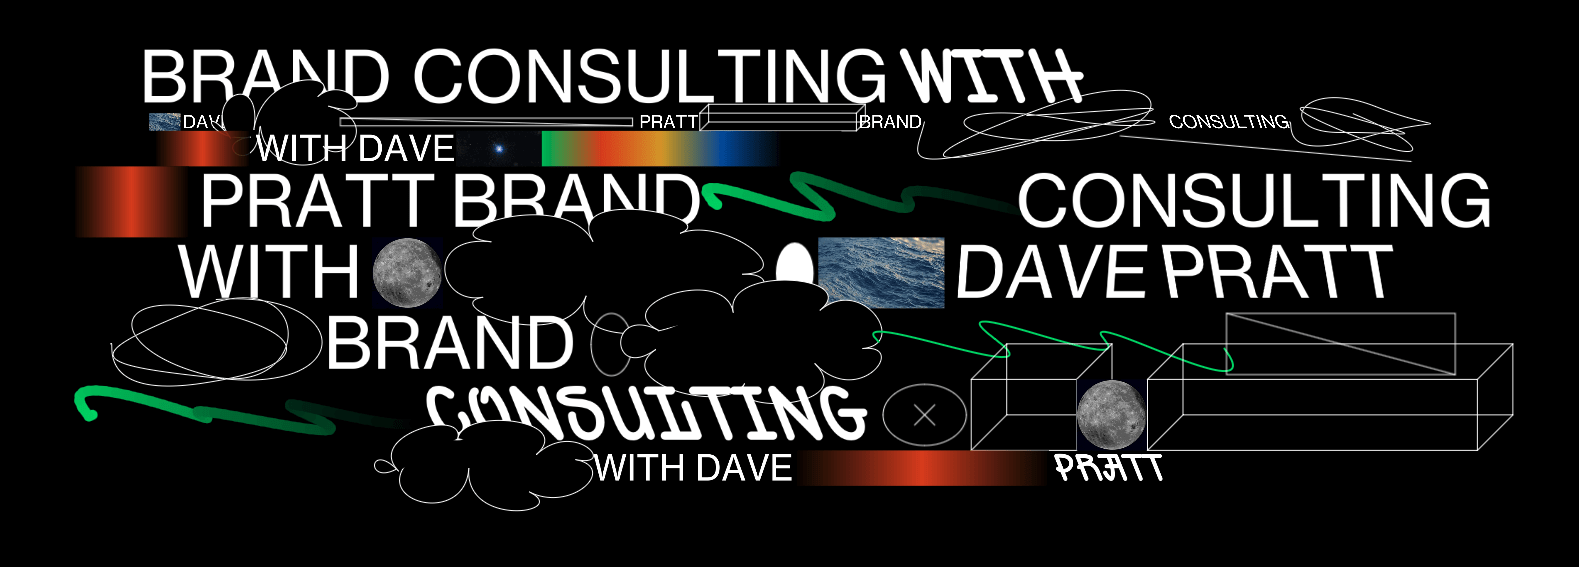 BRAND CONSULTING HEADER